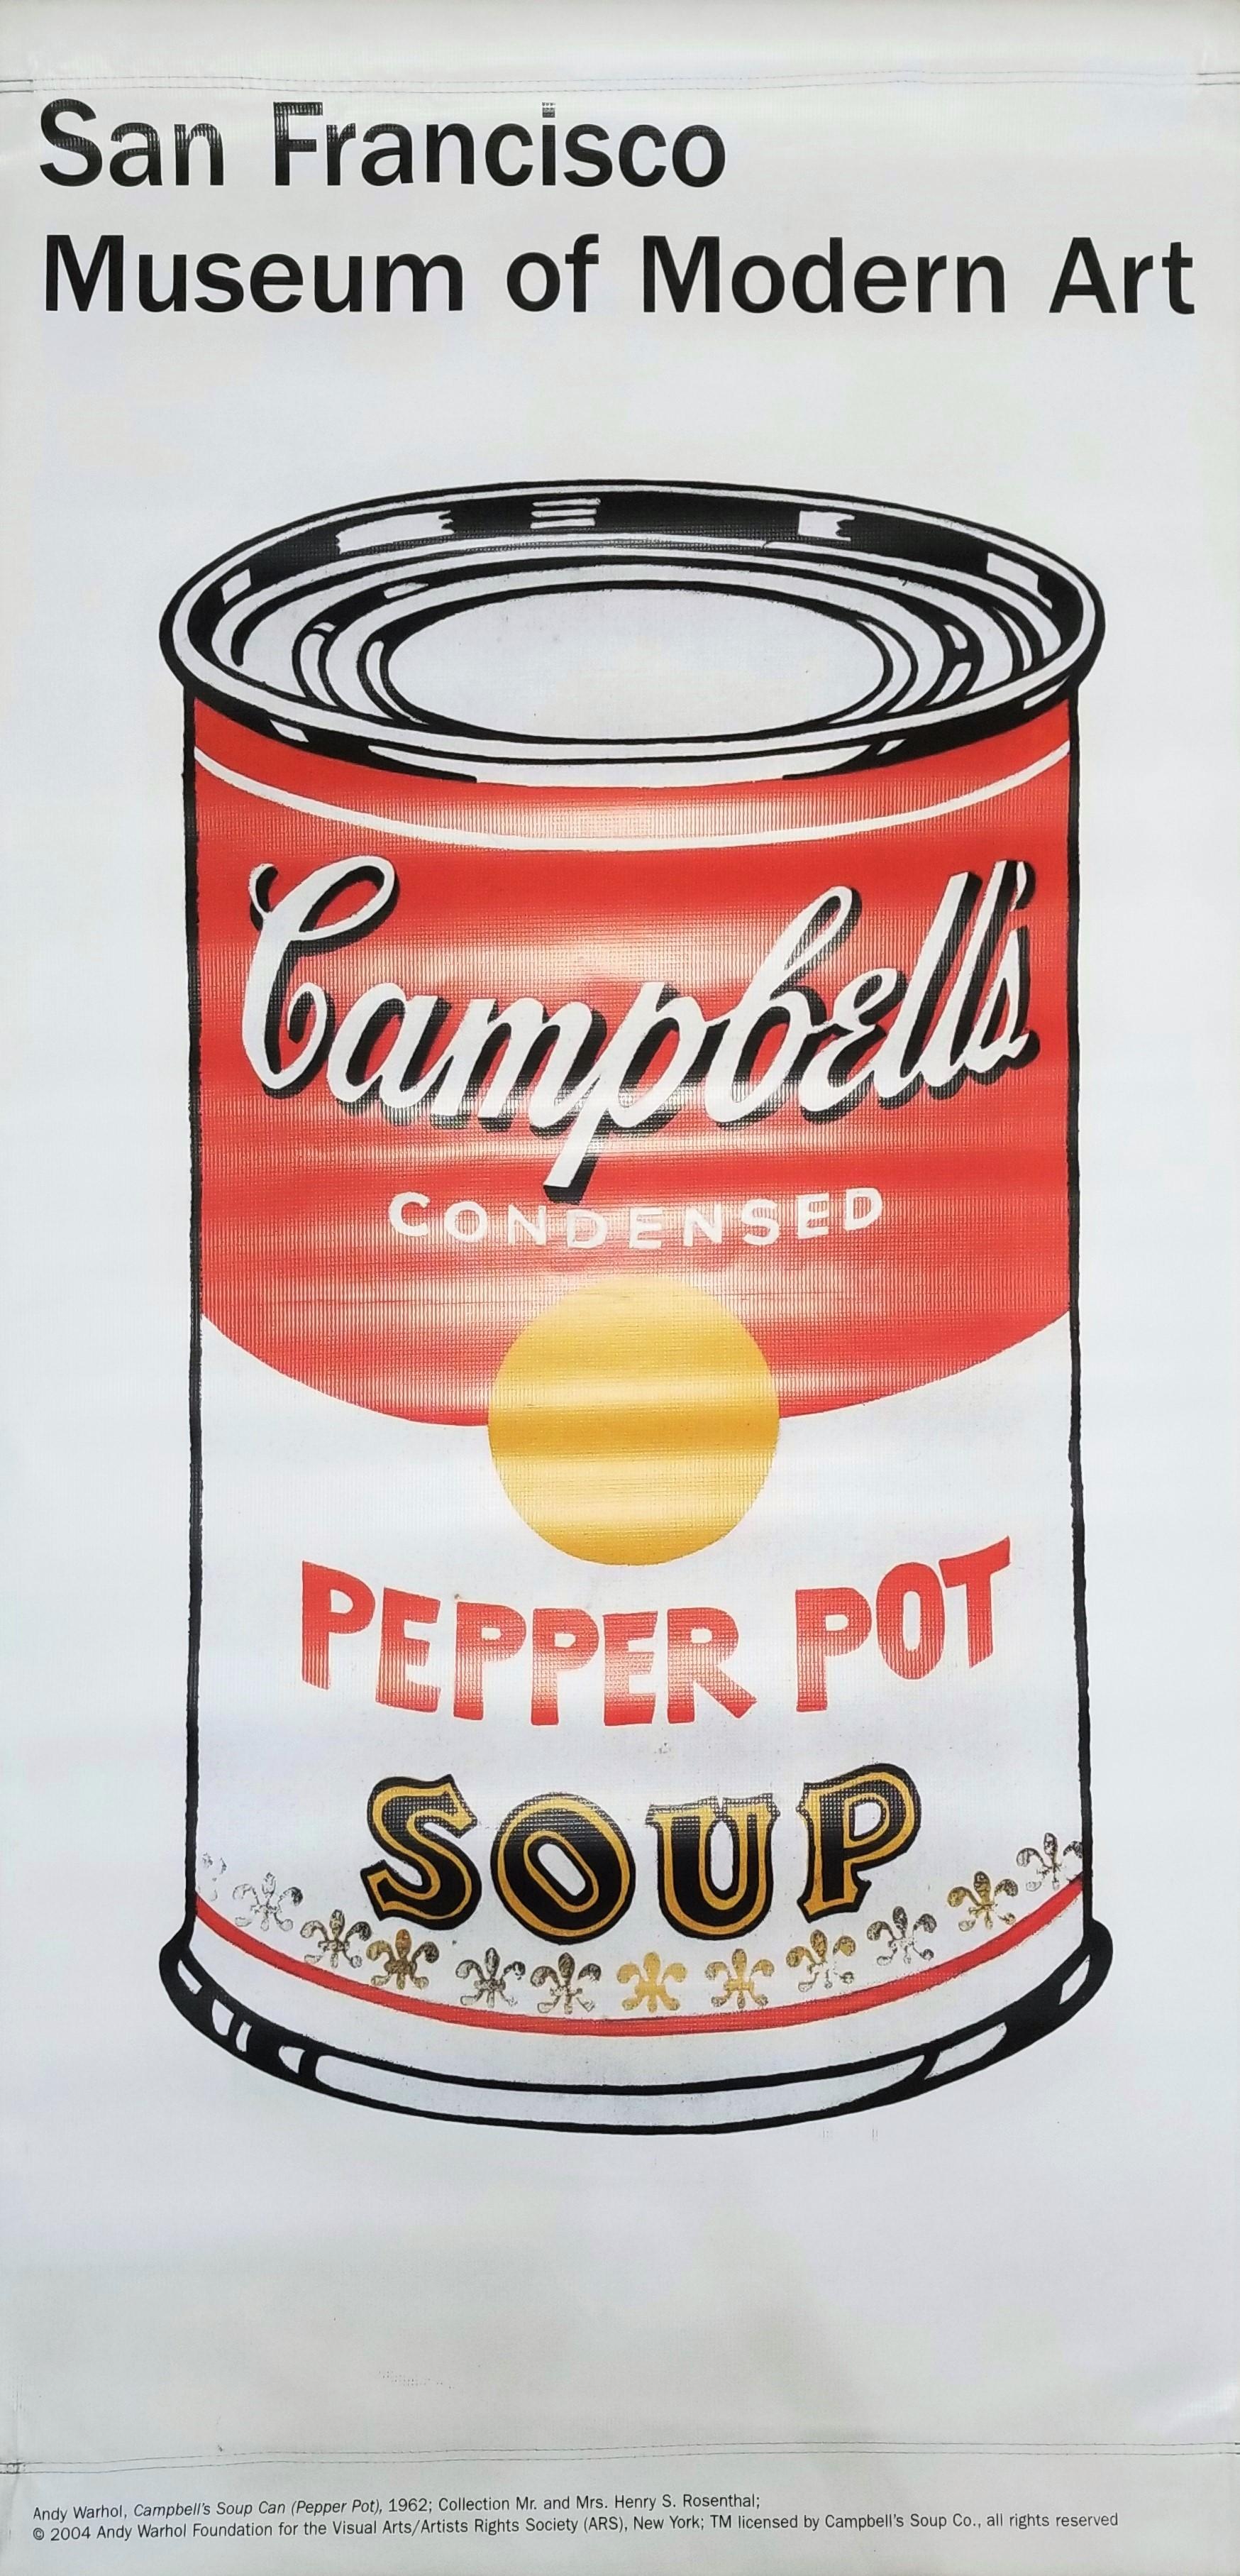 Artist: (after) Andy Warhol (American, 1928-1987)
Title: "San Francisco Museum of Art (Pepper Pot)"
Year: 2004
Medium: Original (double-sided) Offset-Lithograph on Vinyl, Museum Street Banner
Limited edition: Unknown
Printer/Manufacturer: Unknown,